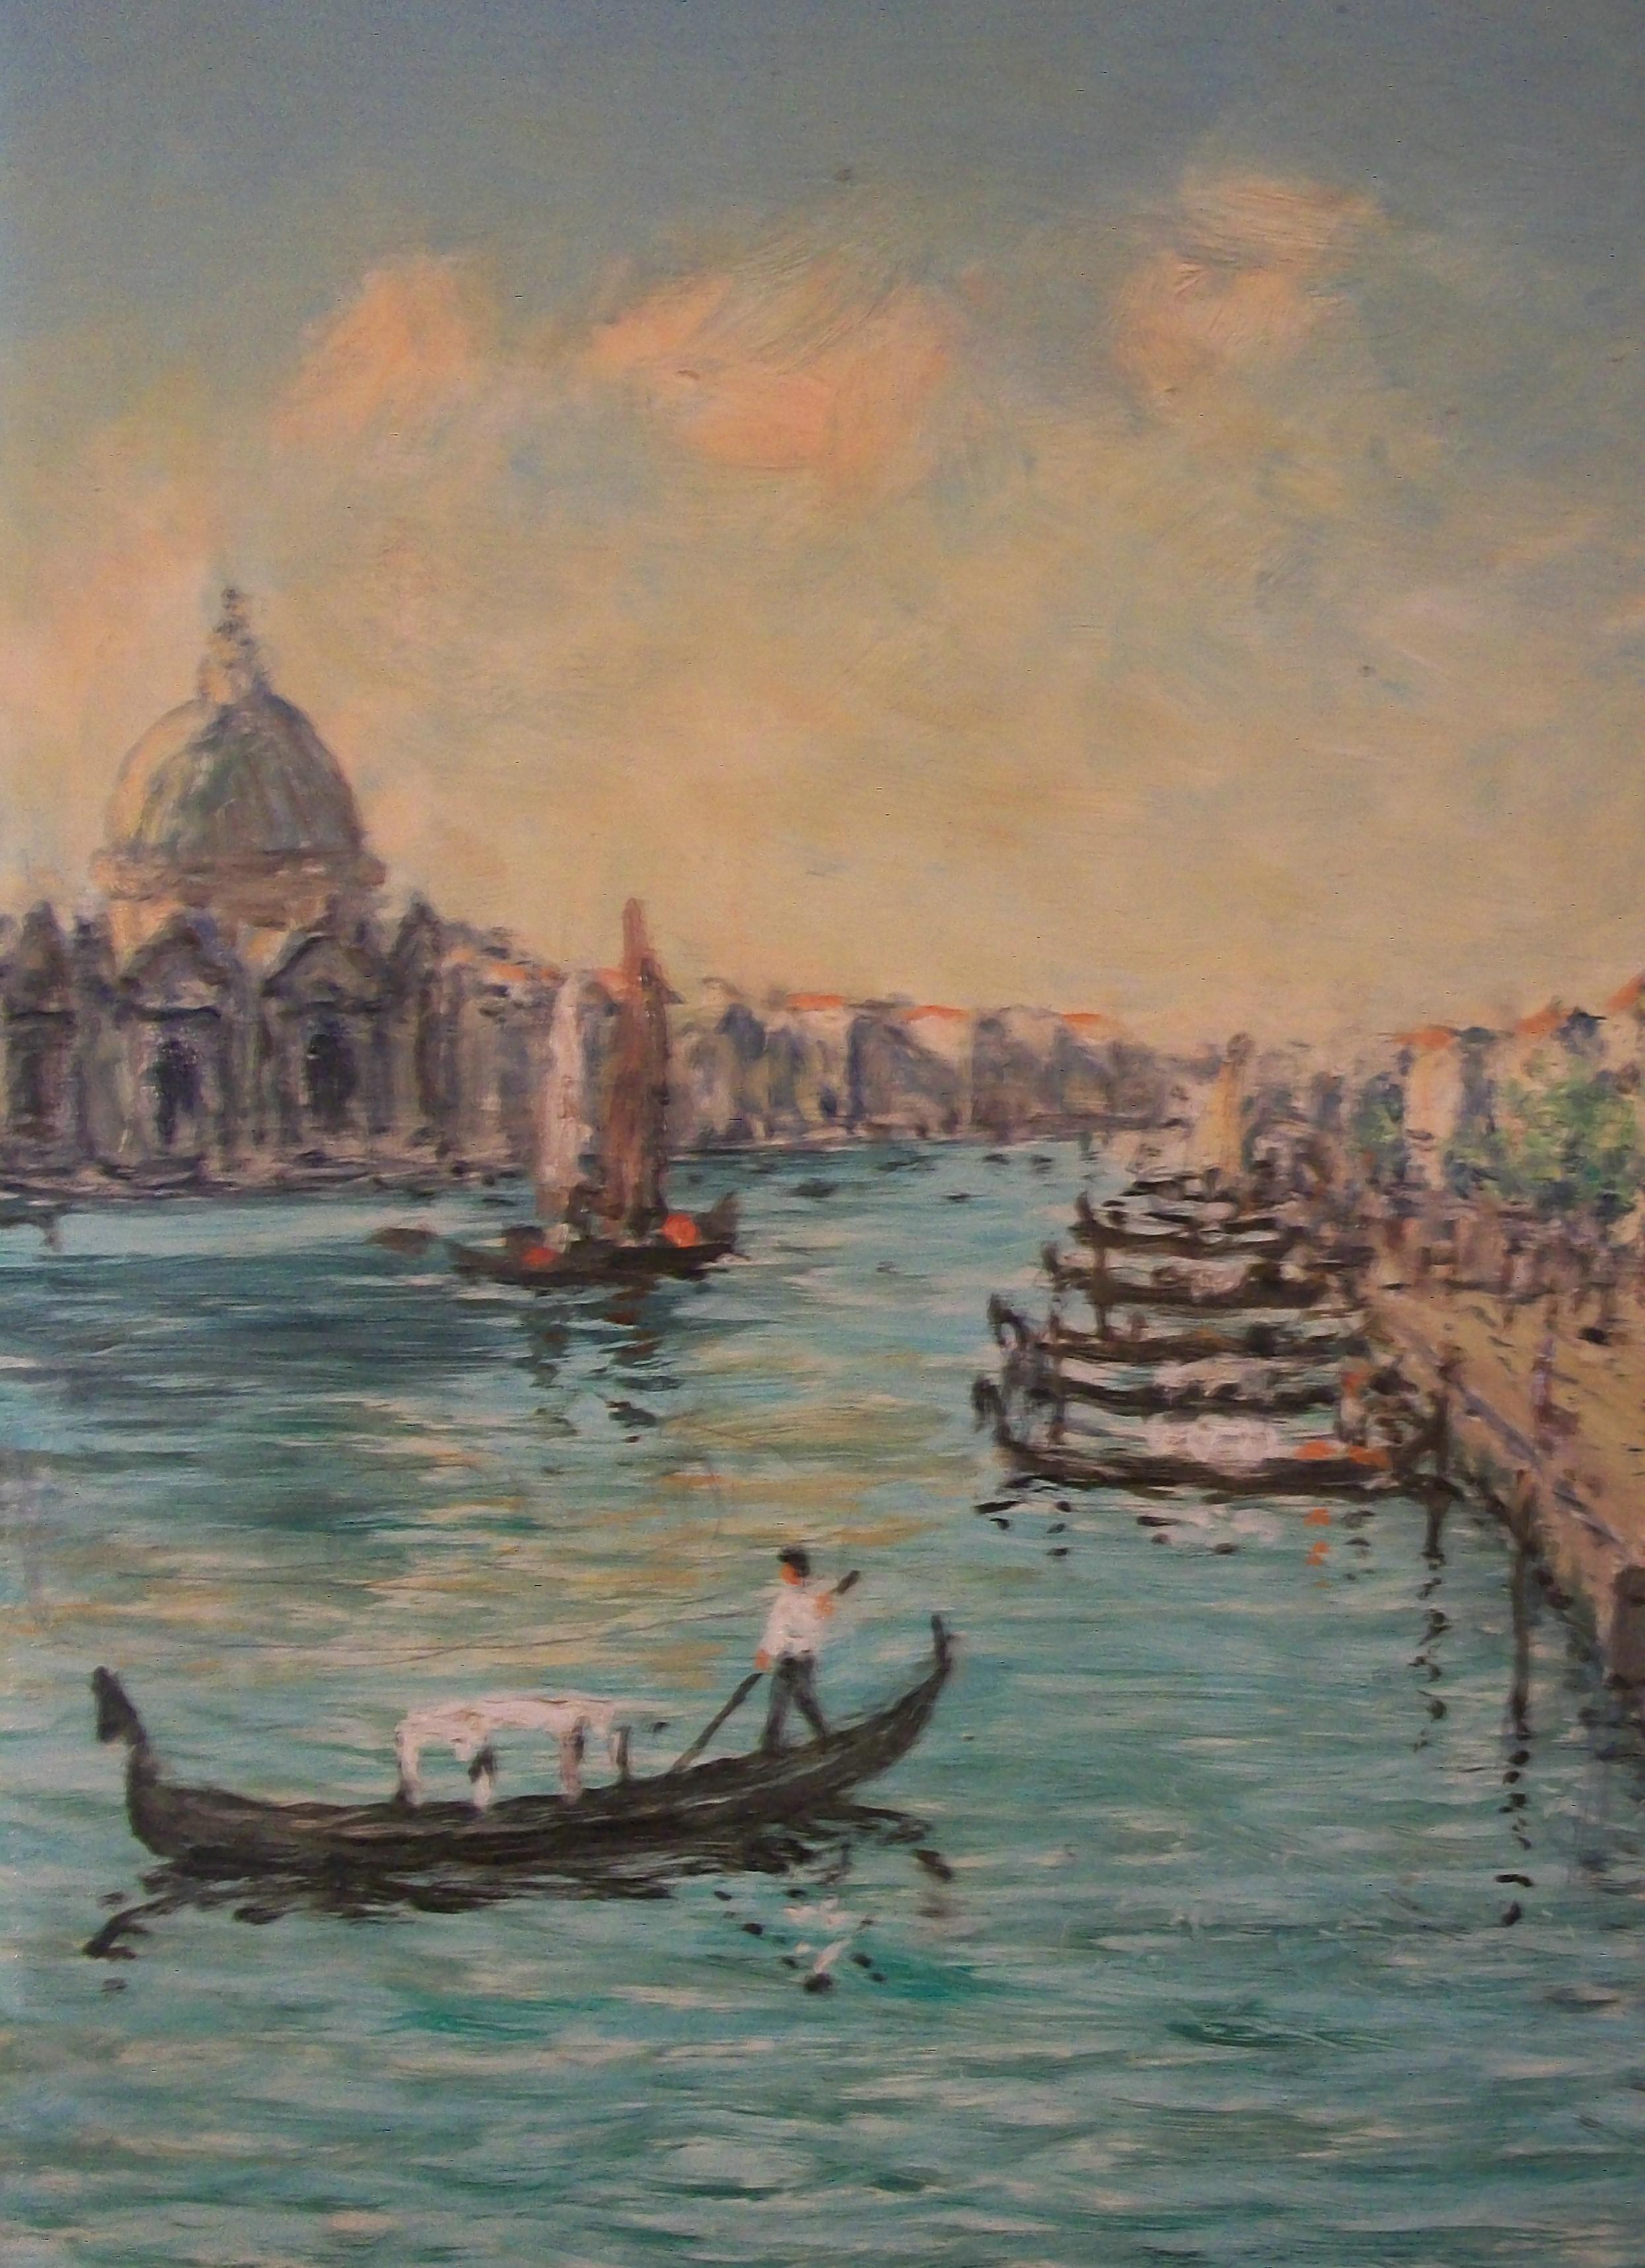 Post Impressionist Grand Tour style Venetian oil painting on prepared Masonite panel - titled verso 'PALAZZO DUCALE, VENEZIA' - featuring the Doge's Palace on the Grand Canal with boats, people and St. Marks Basilica in the distance - finished with